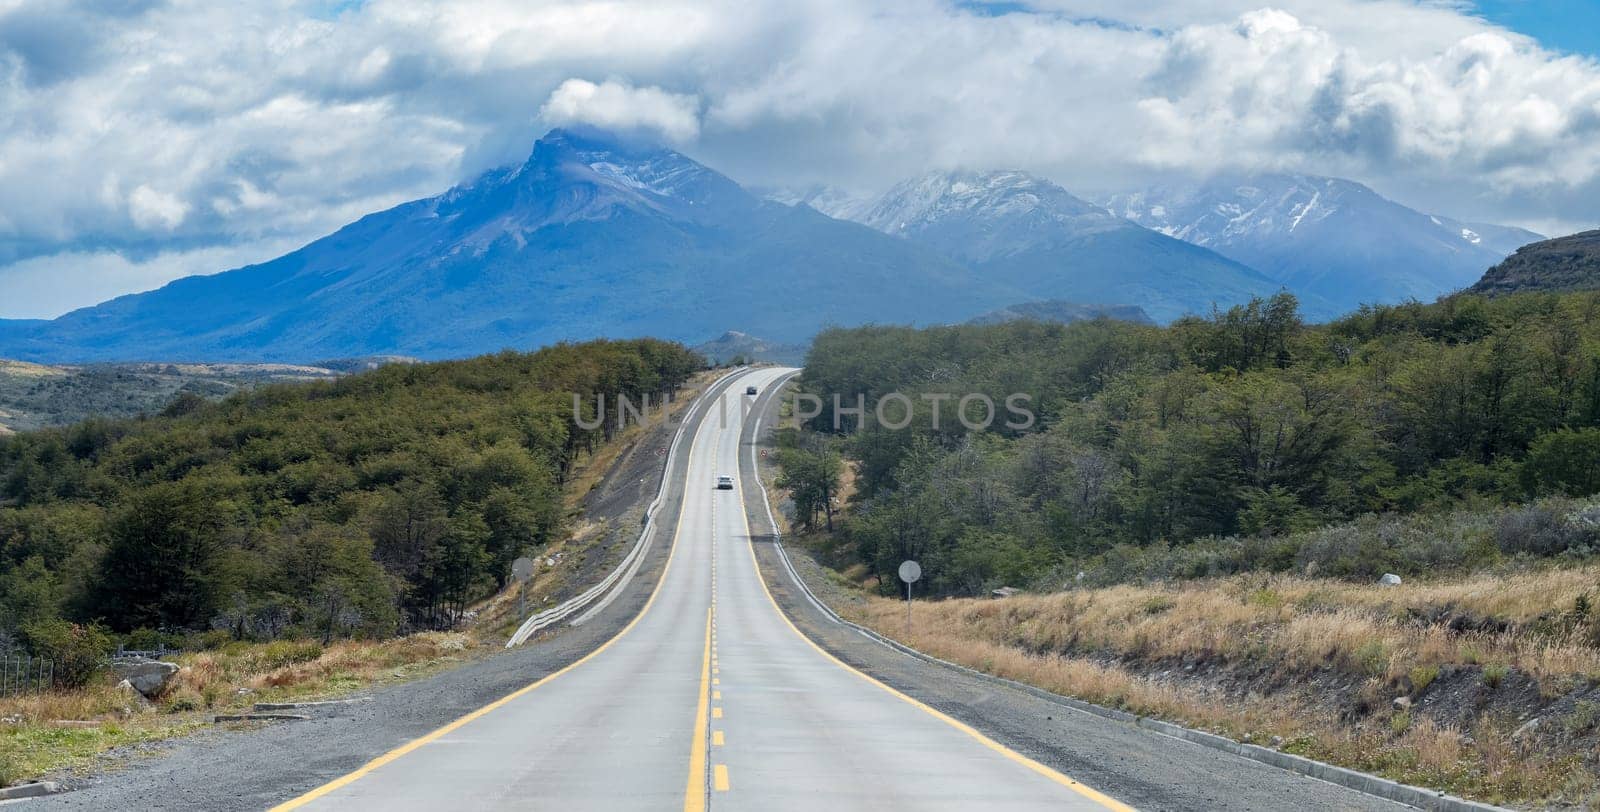 Expansive highway leads to mountains under cloudy sky.